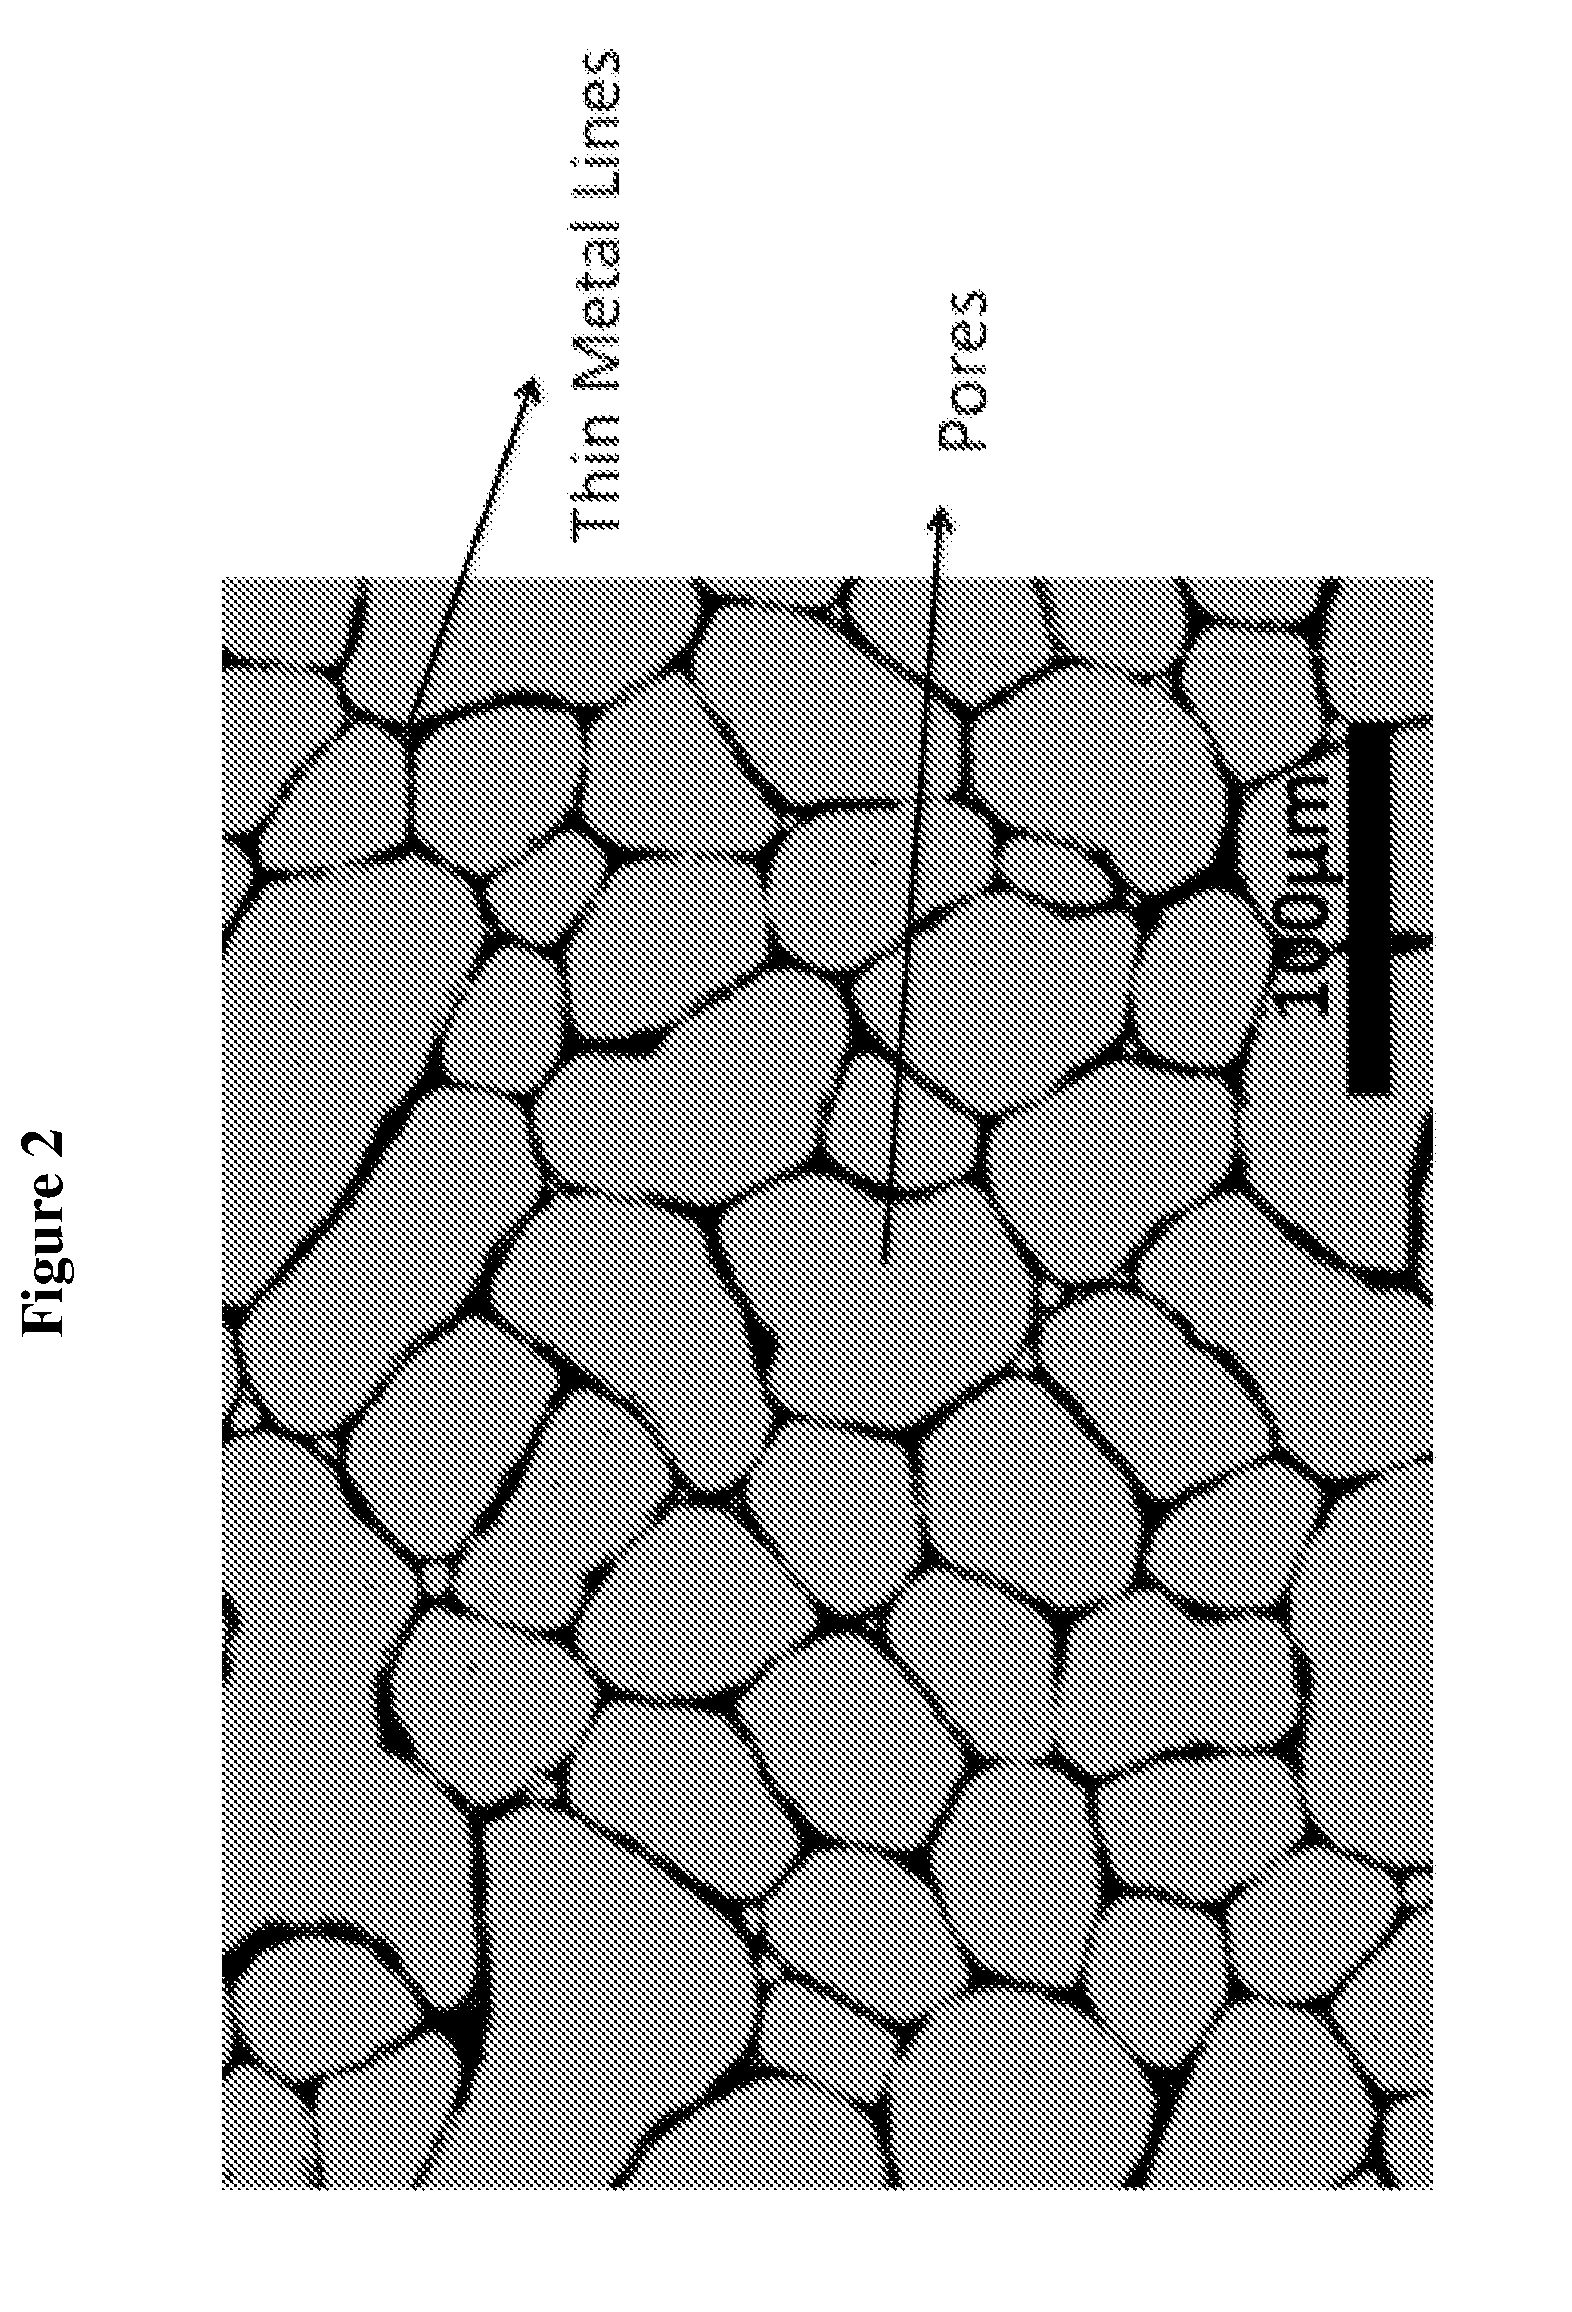 Composition for making transparent conductive coating based on nanoparticle dispersion